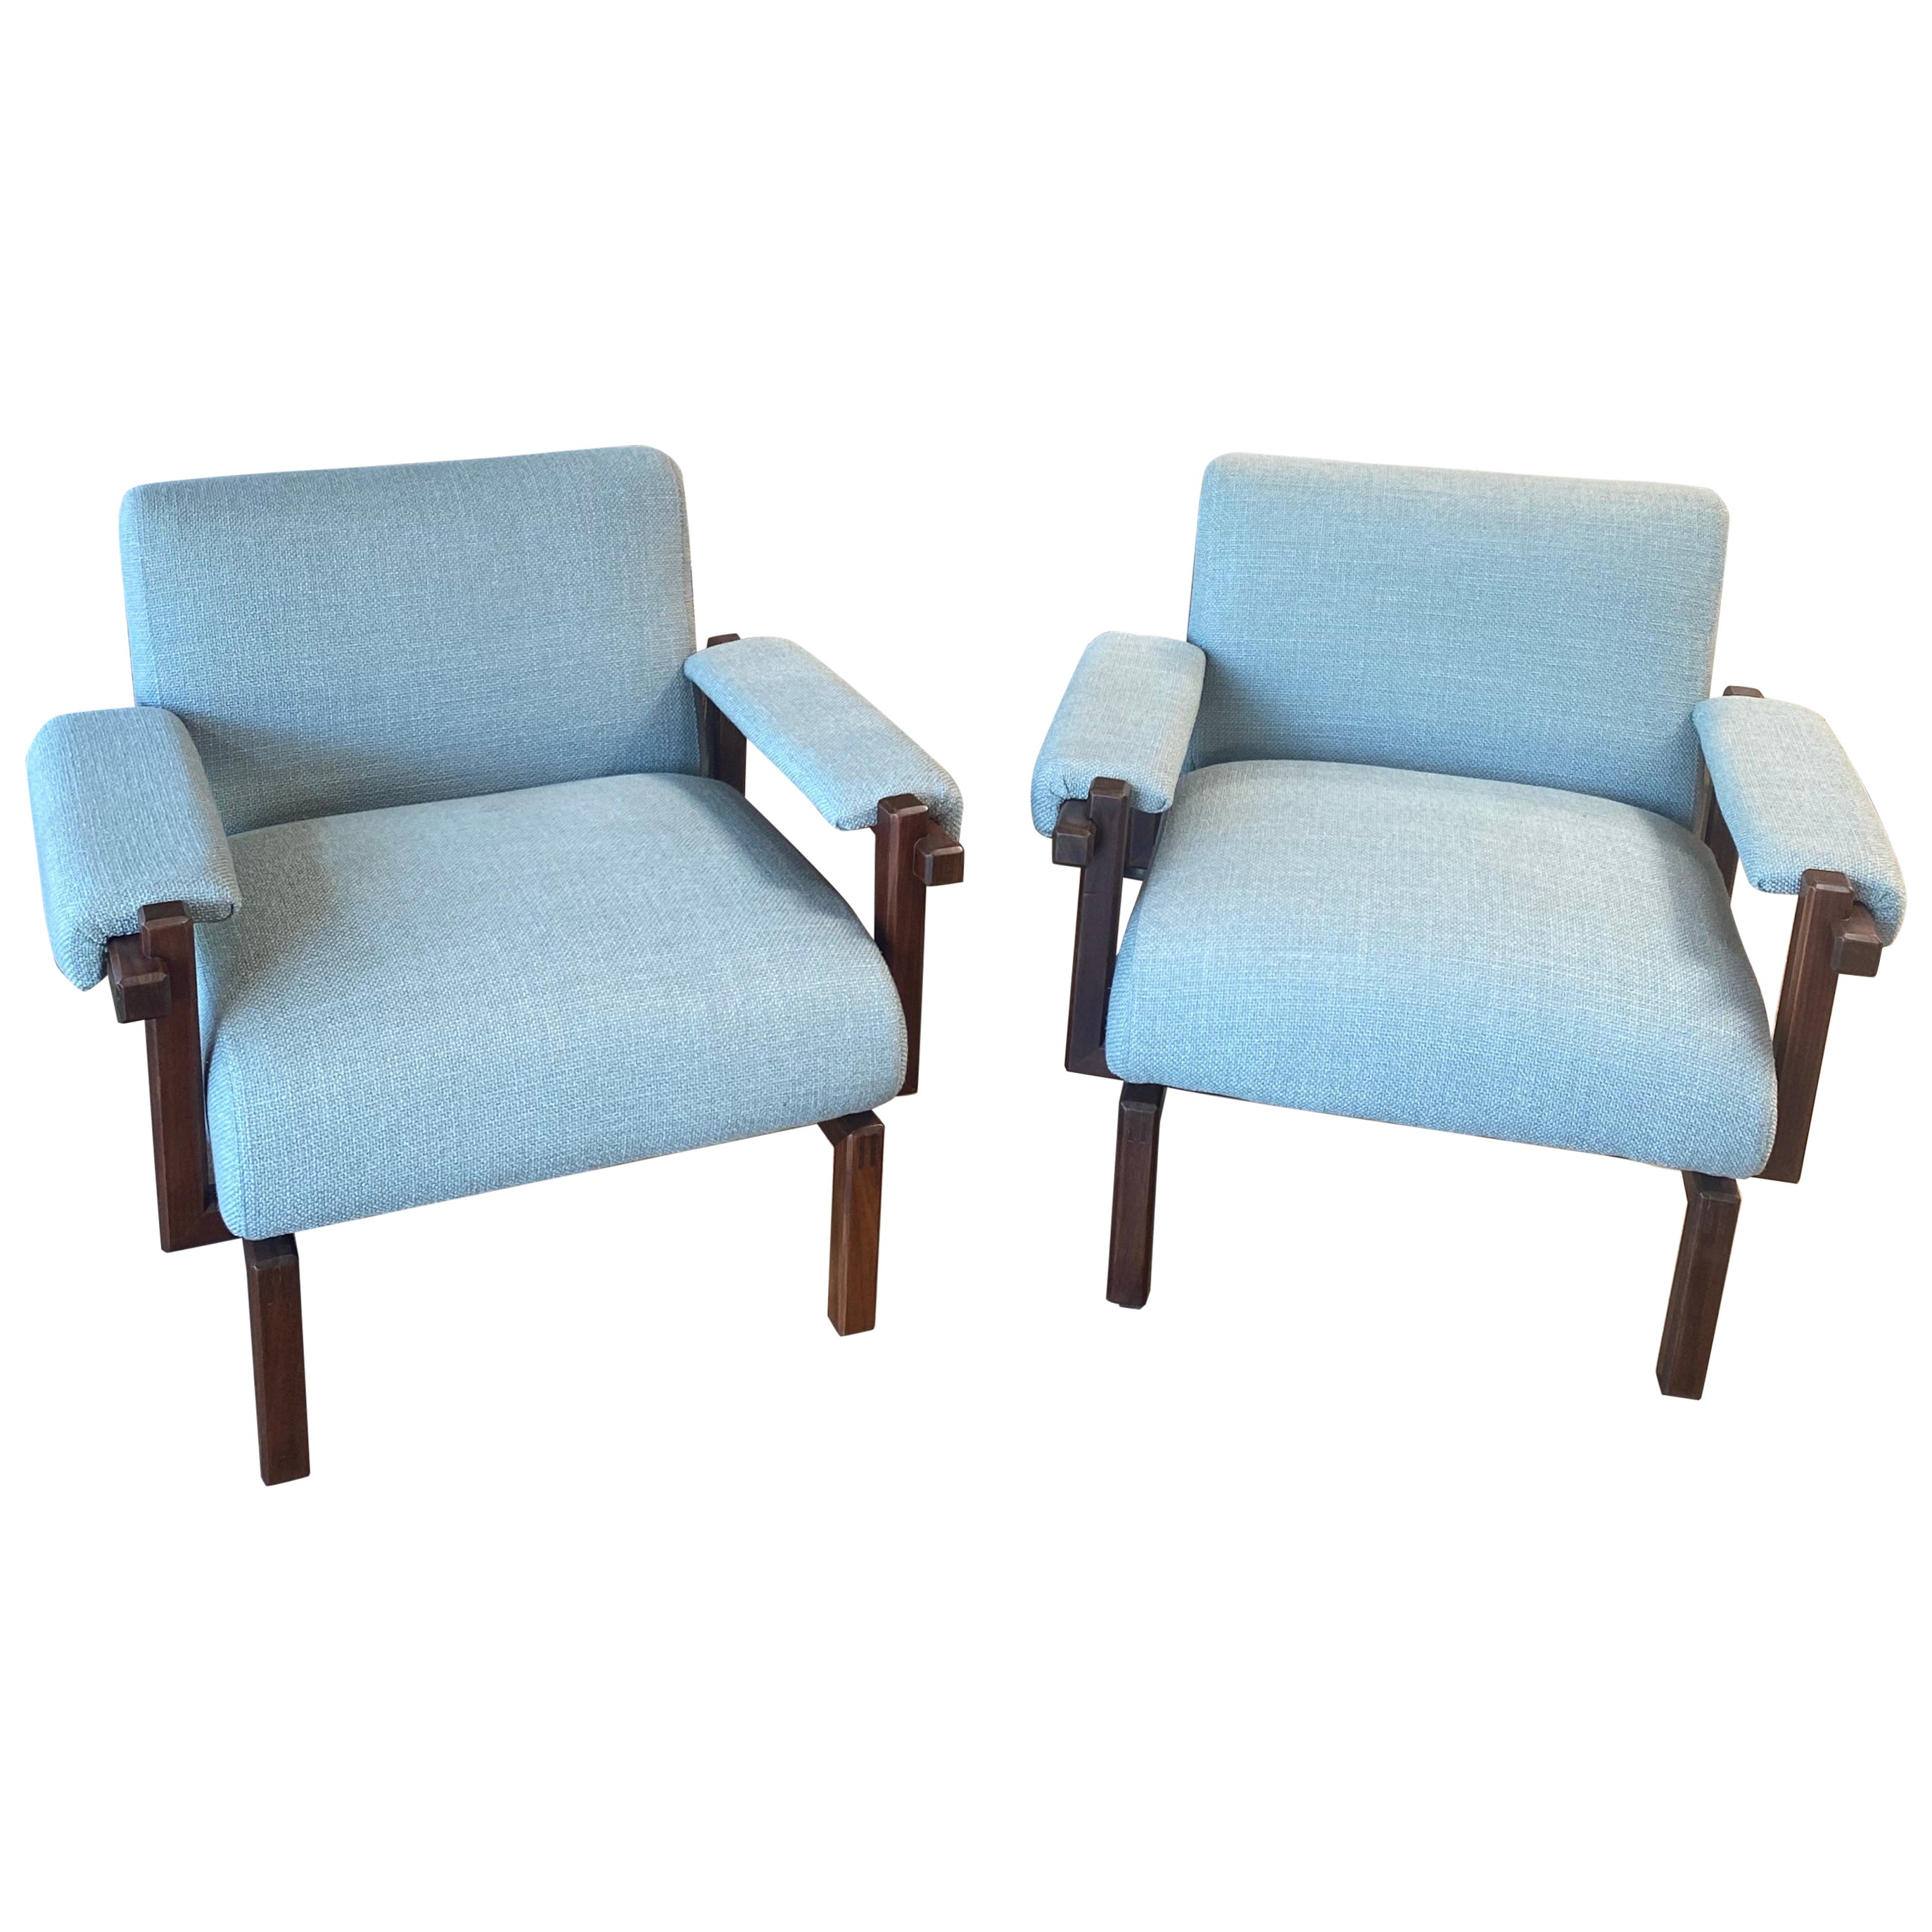 Pair of Mid-Century Armchairs by Raffaella Crespi, Italy, 1960s For Sale